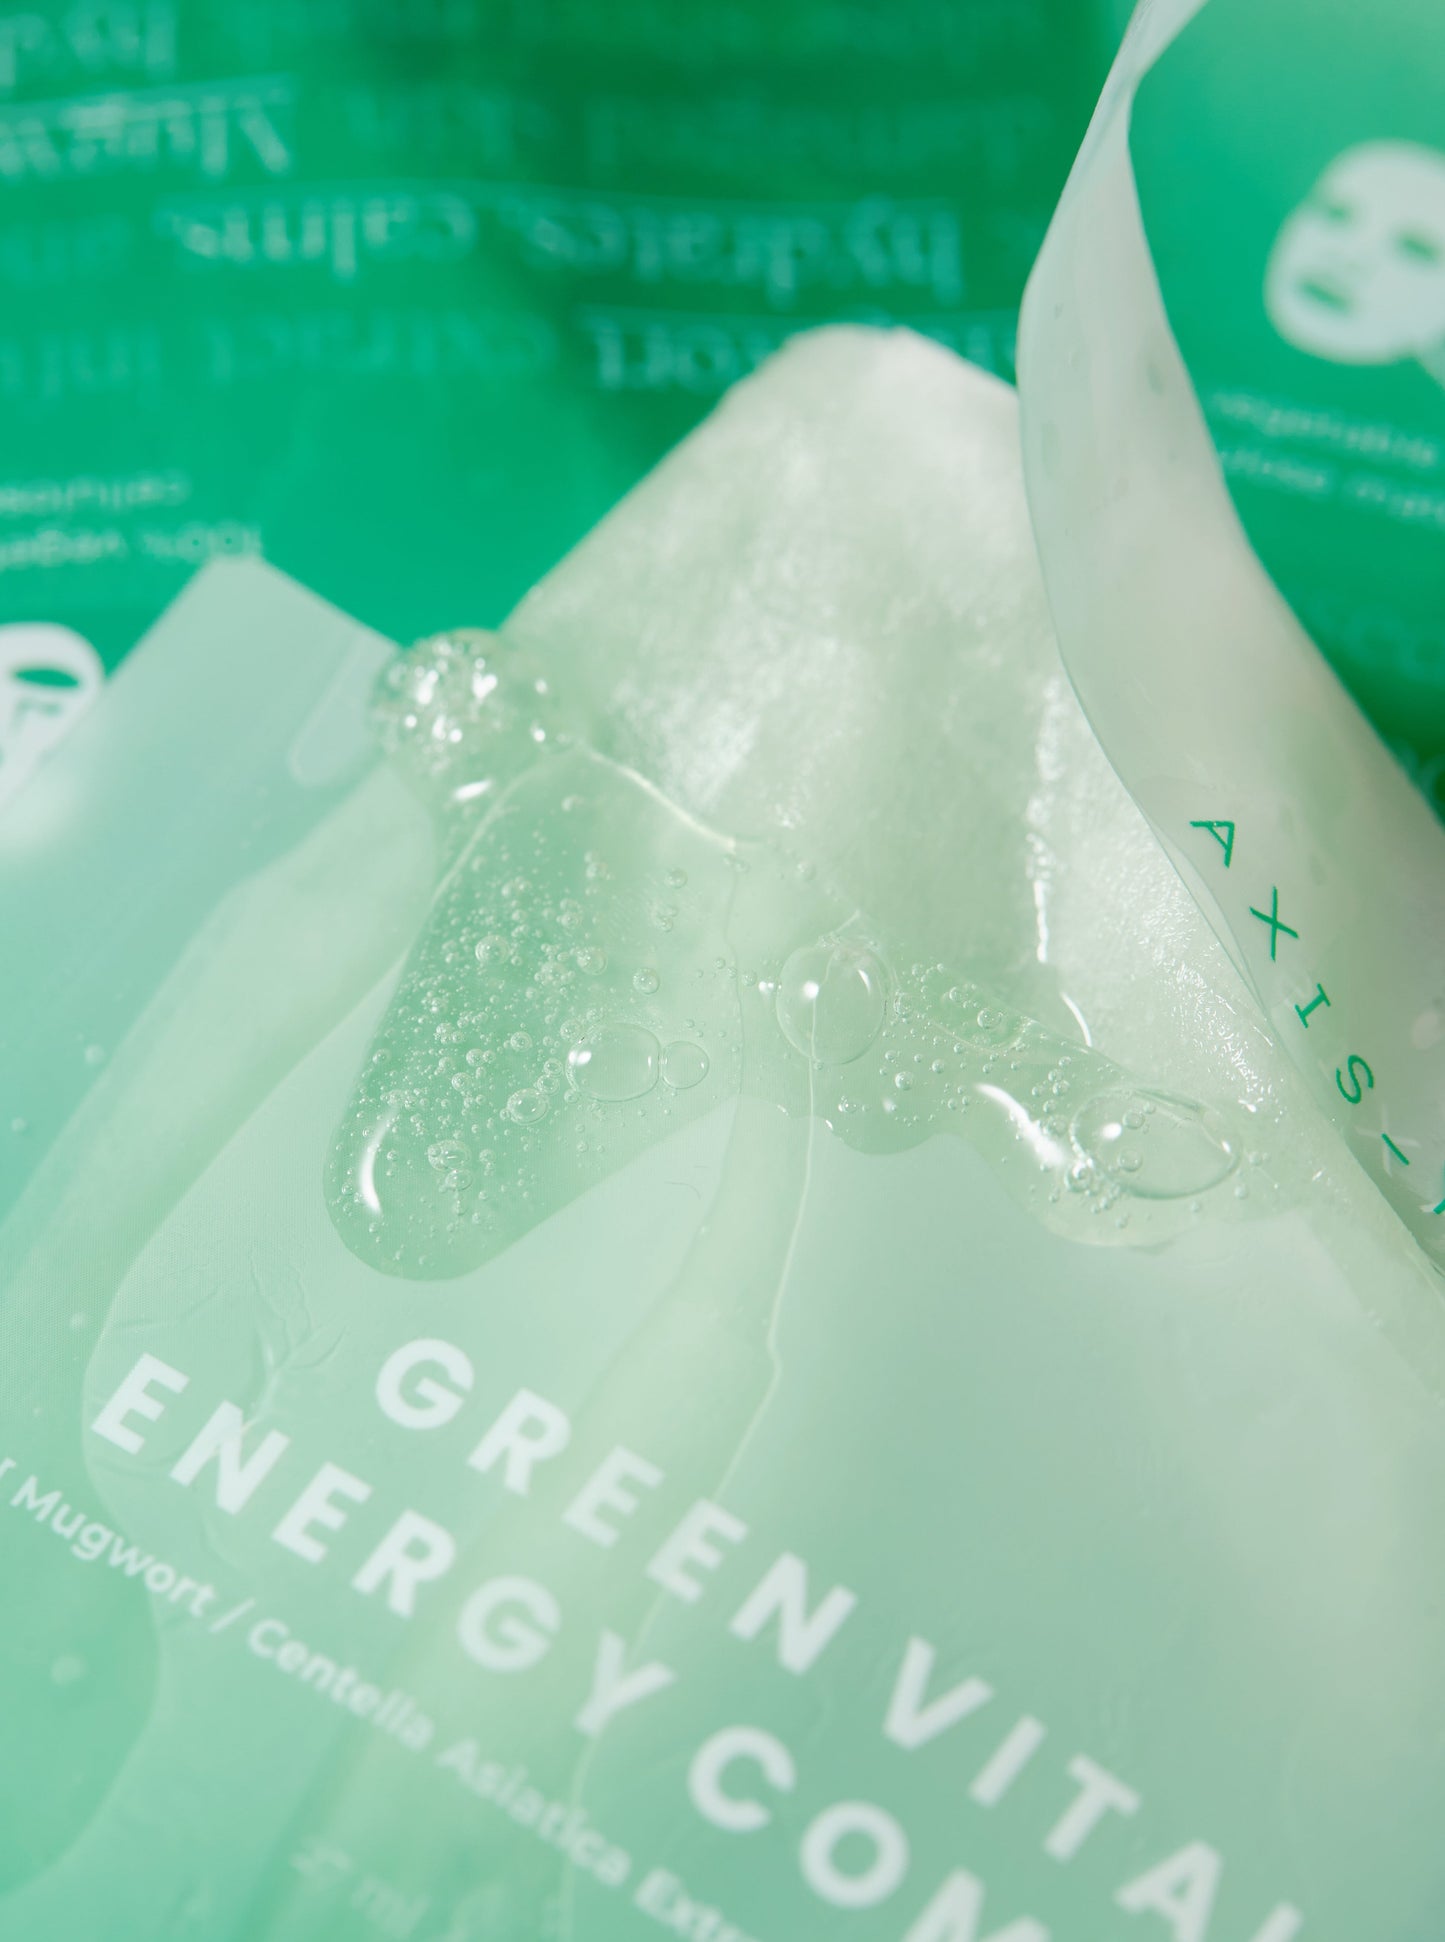 Axis-y Green Vital Energy Complex Mask (5)